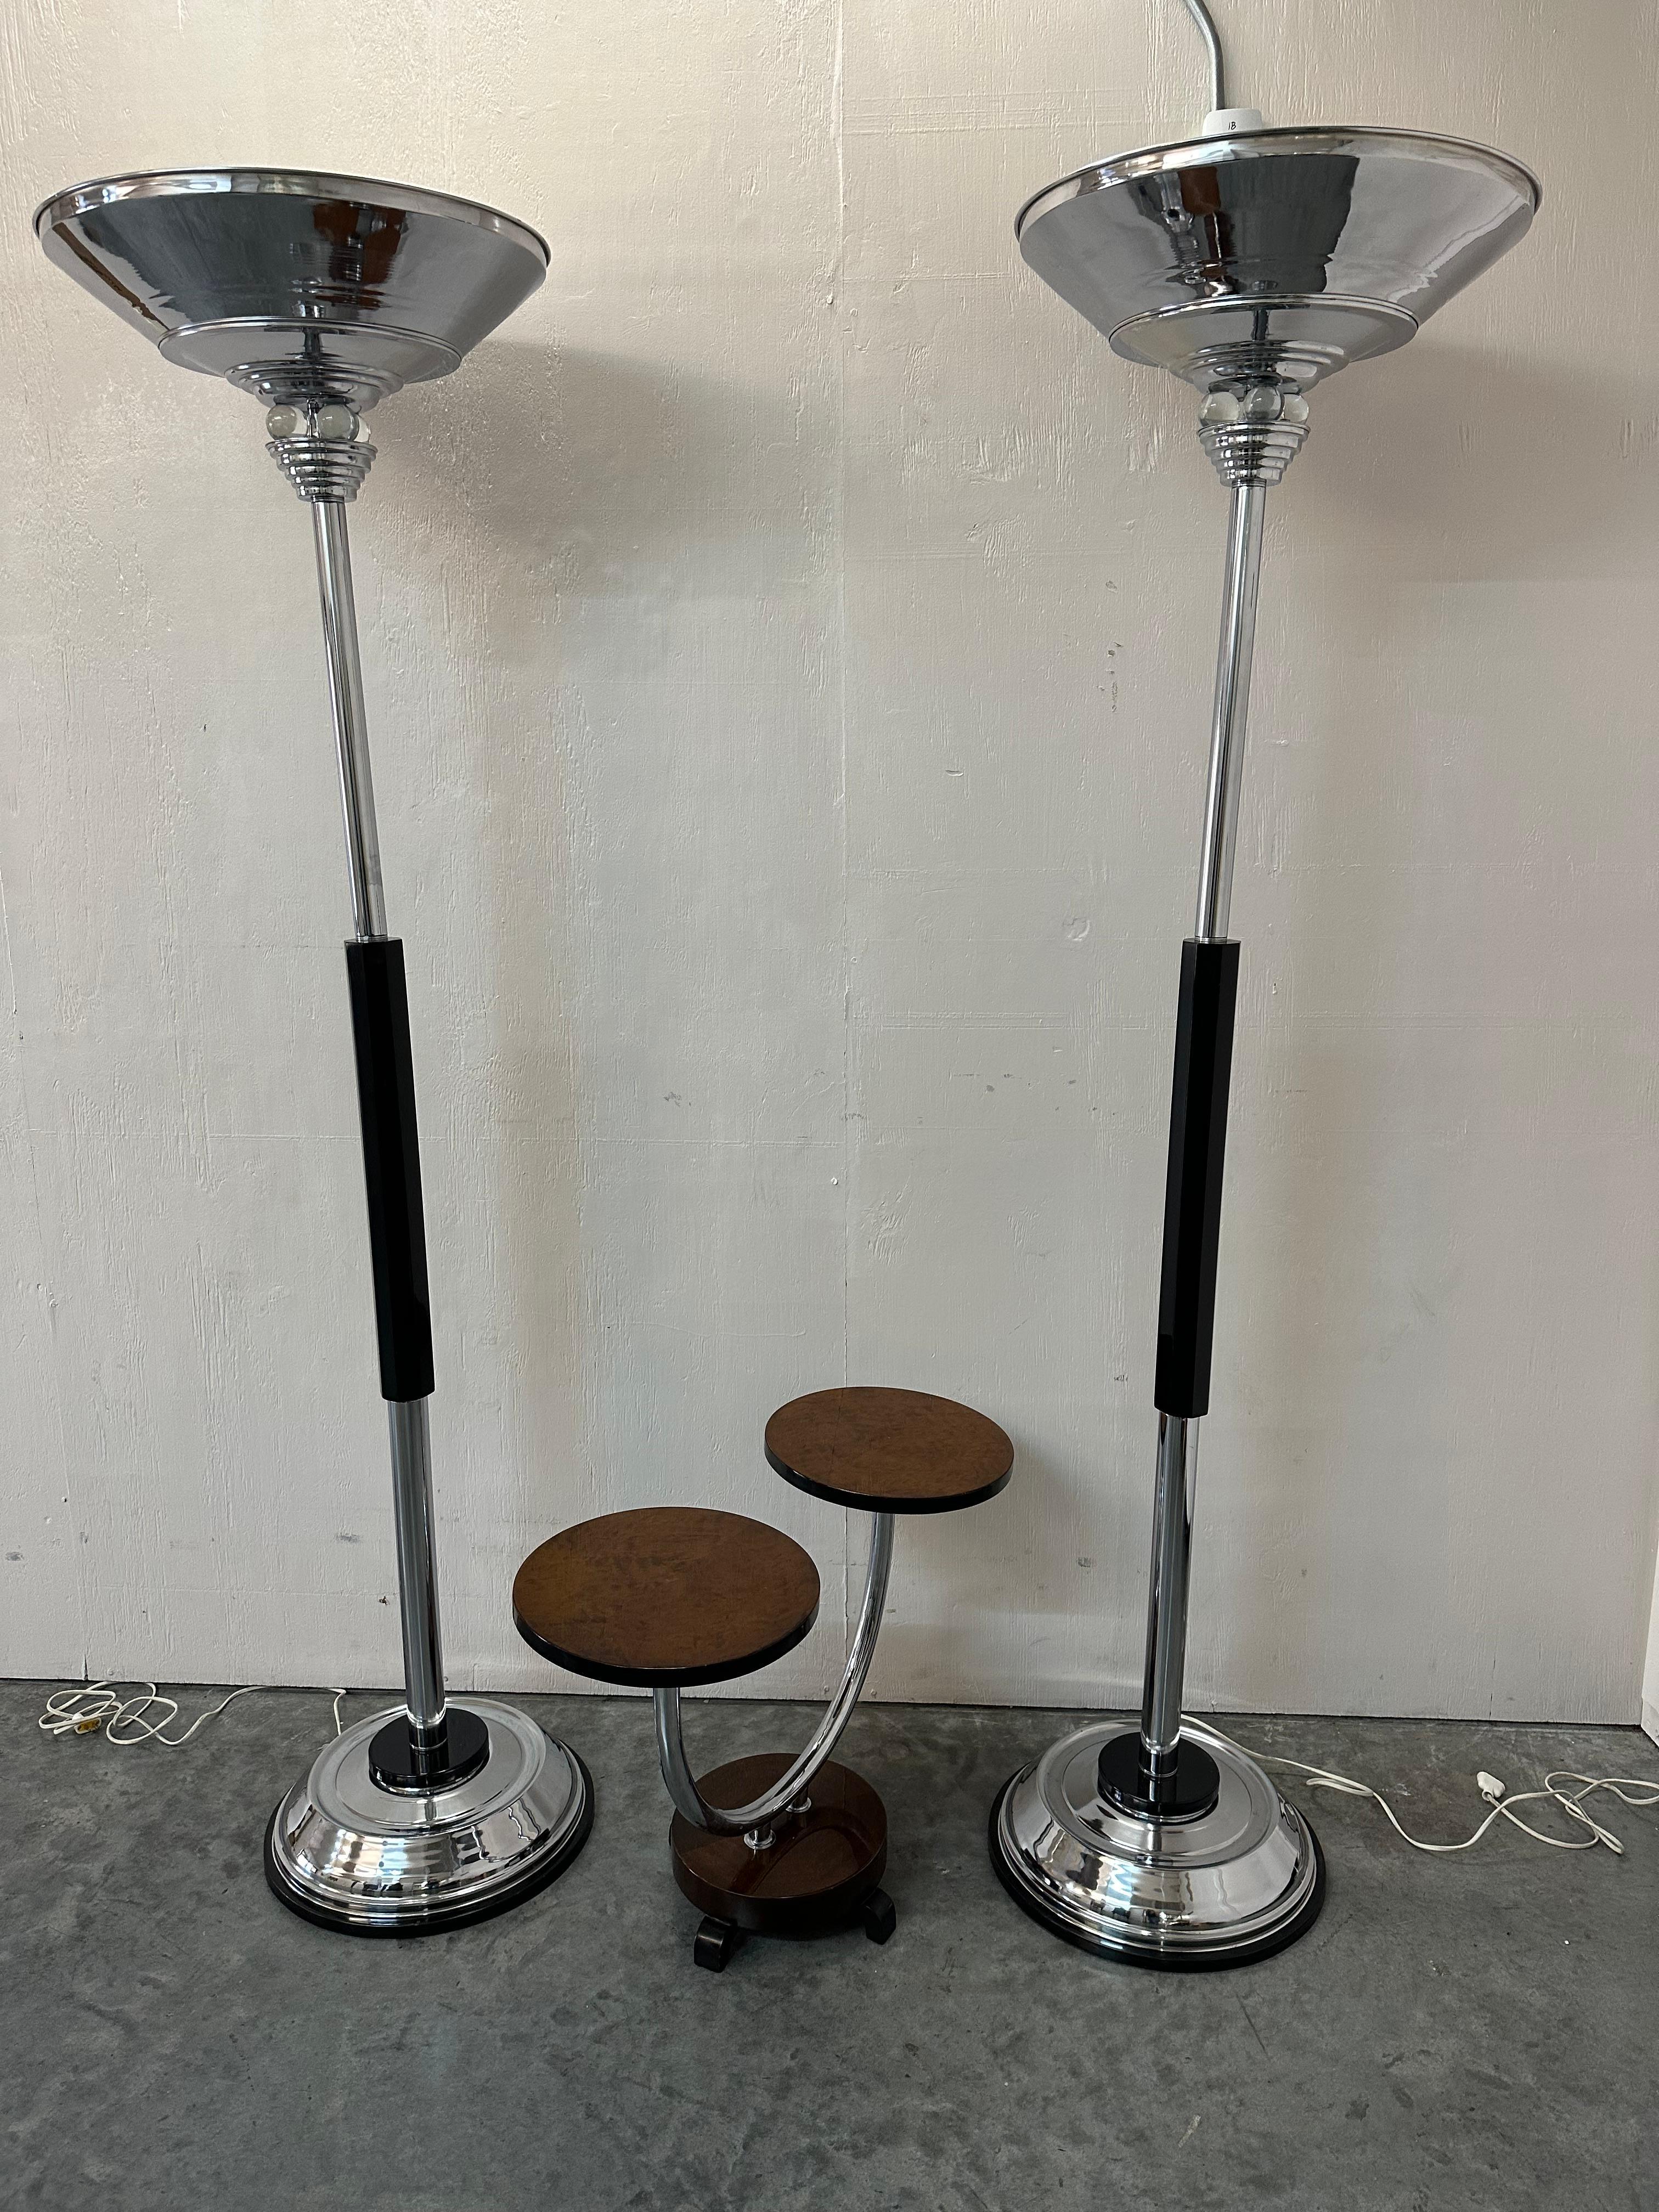 Glass 2 Art Deco Floor Lamps, France, Materials: Wood, glass and Chrome, 1940 For Sale